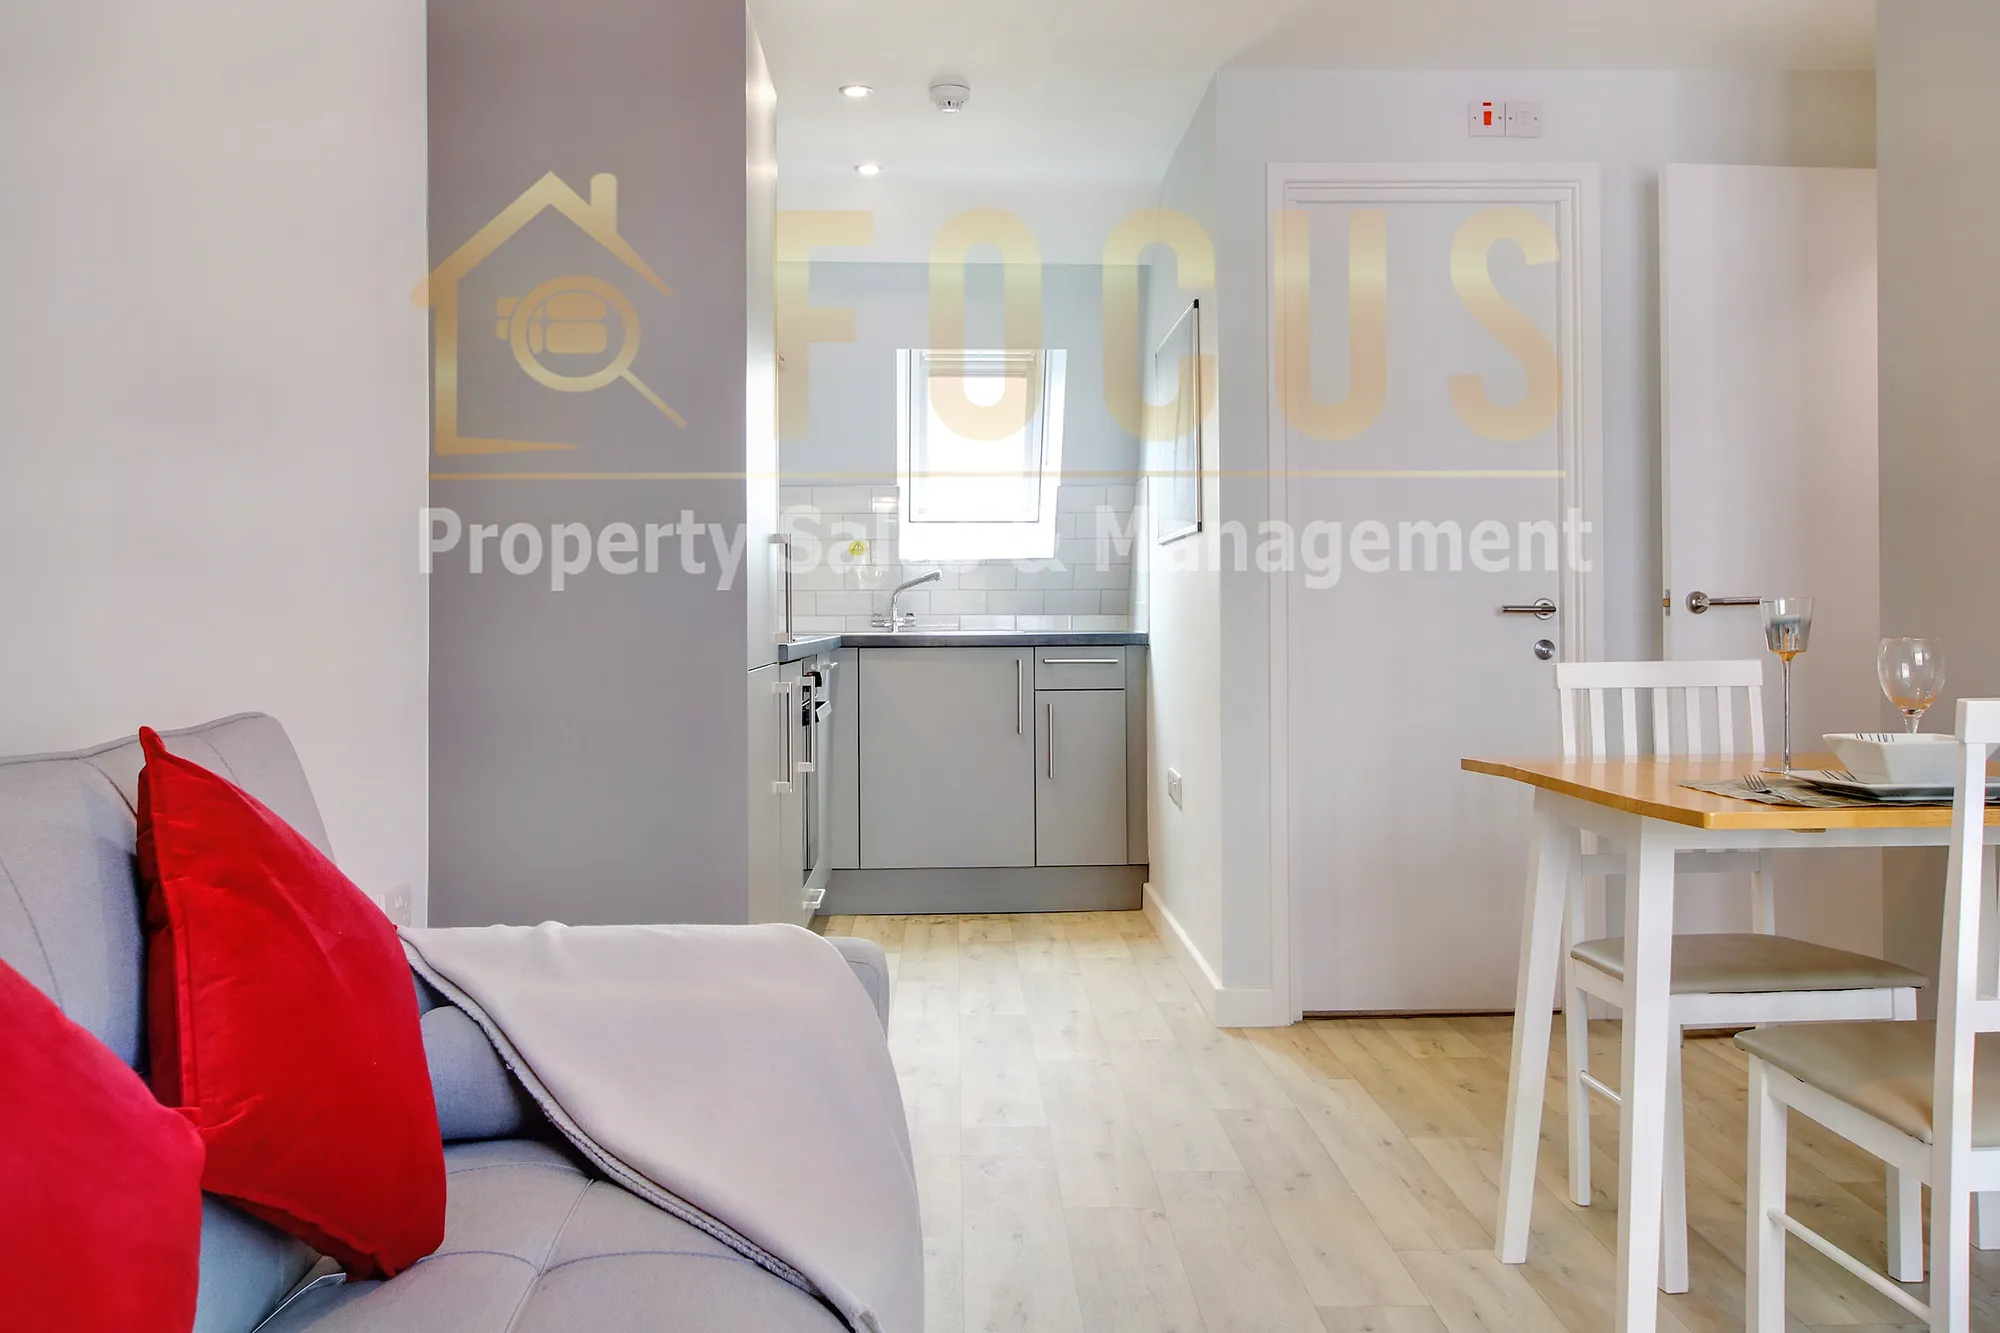 1 bed flat to rent in Clarendon Park Road, Leicester  - Property Image 7